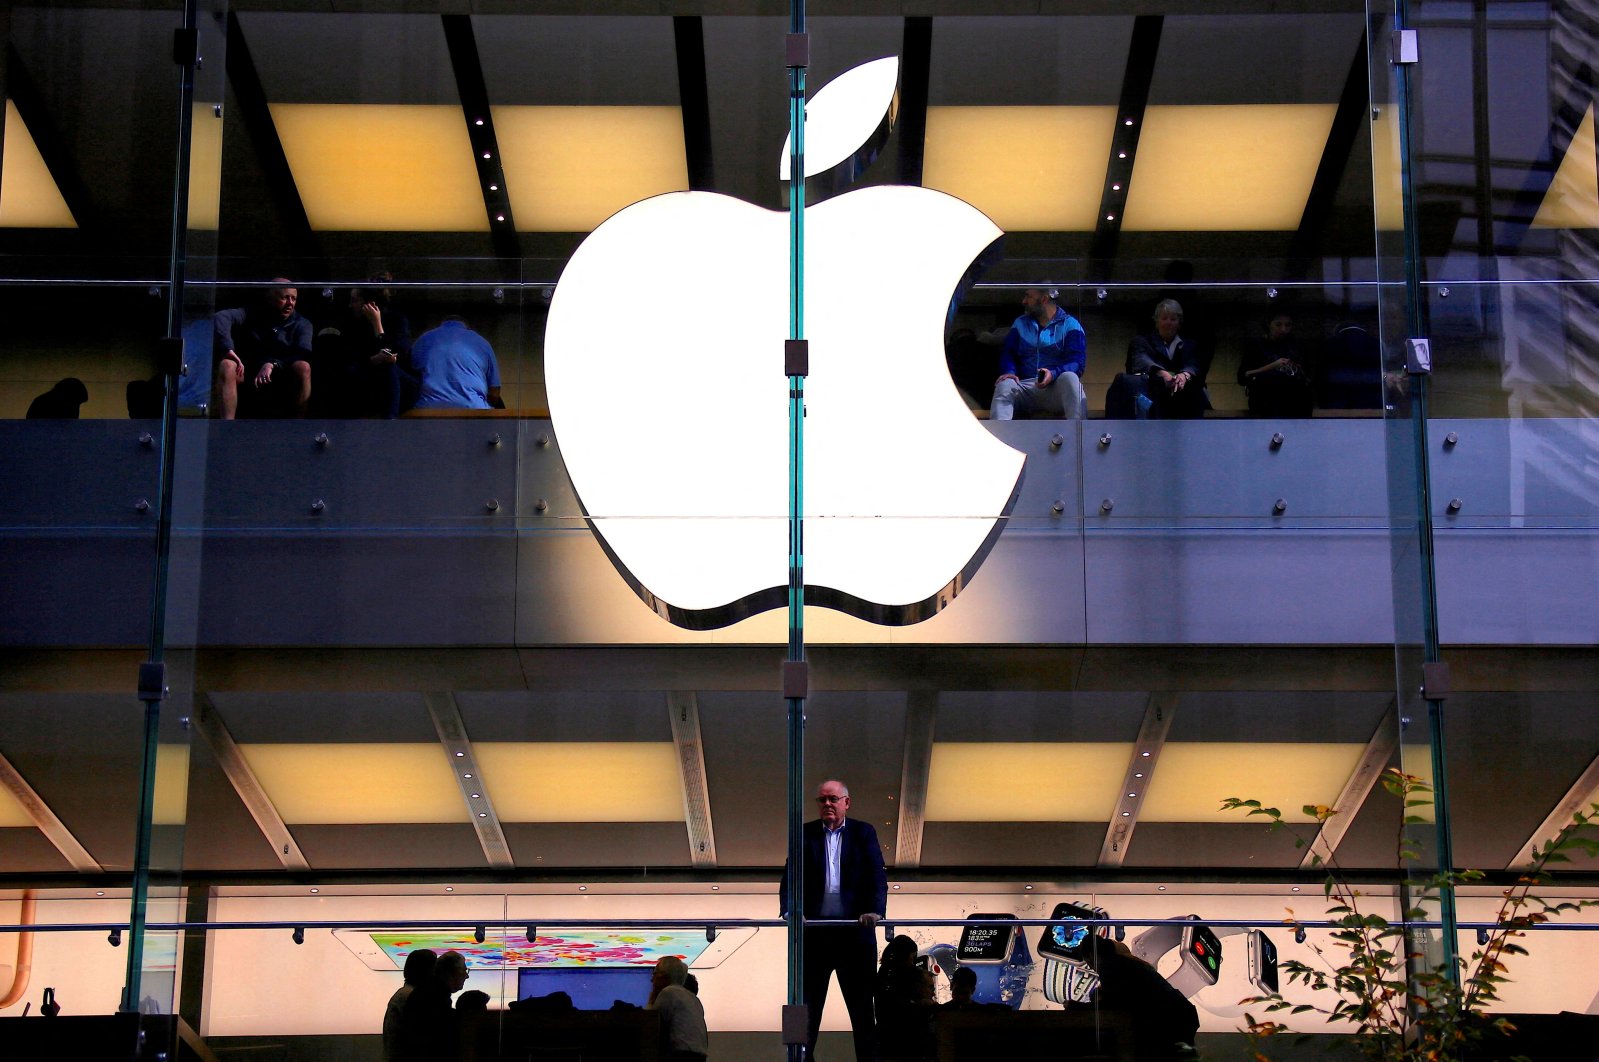 A customer stands underneath an illuminated Apple logo as he looks out the window of the Apple store located in central Sydney, Australia, May 28, 2018. (Reuters Photo)